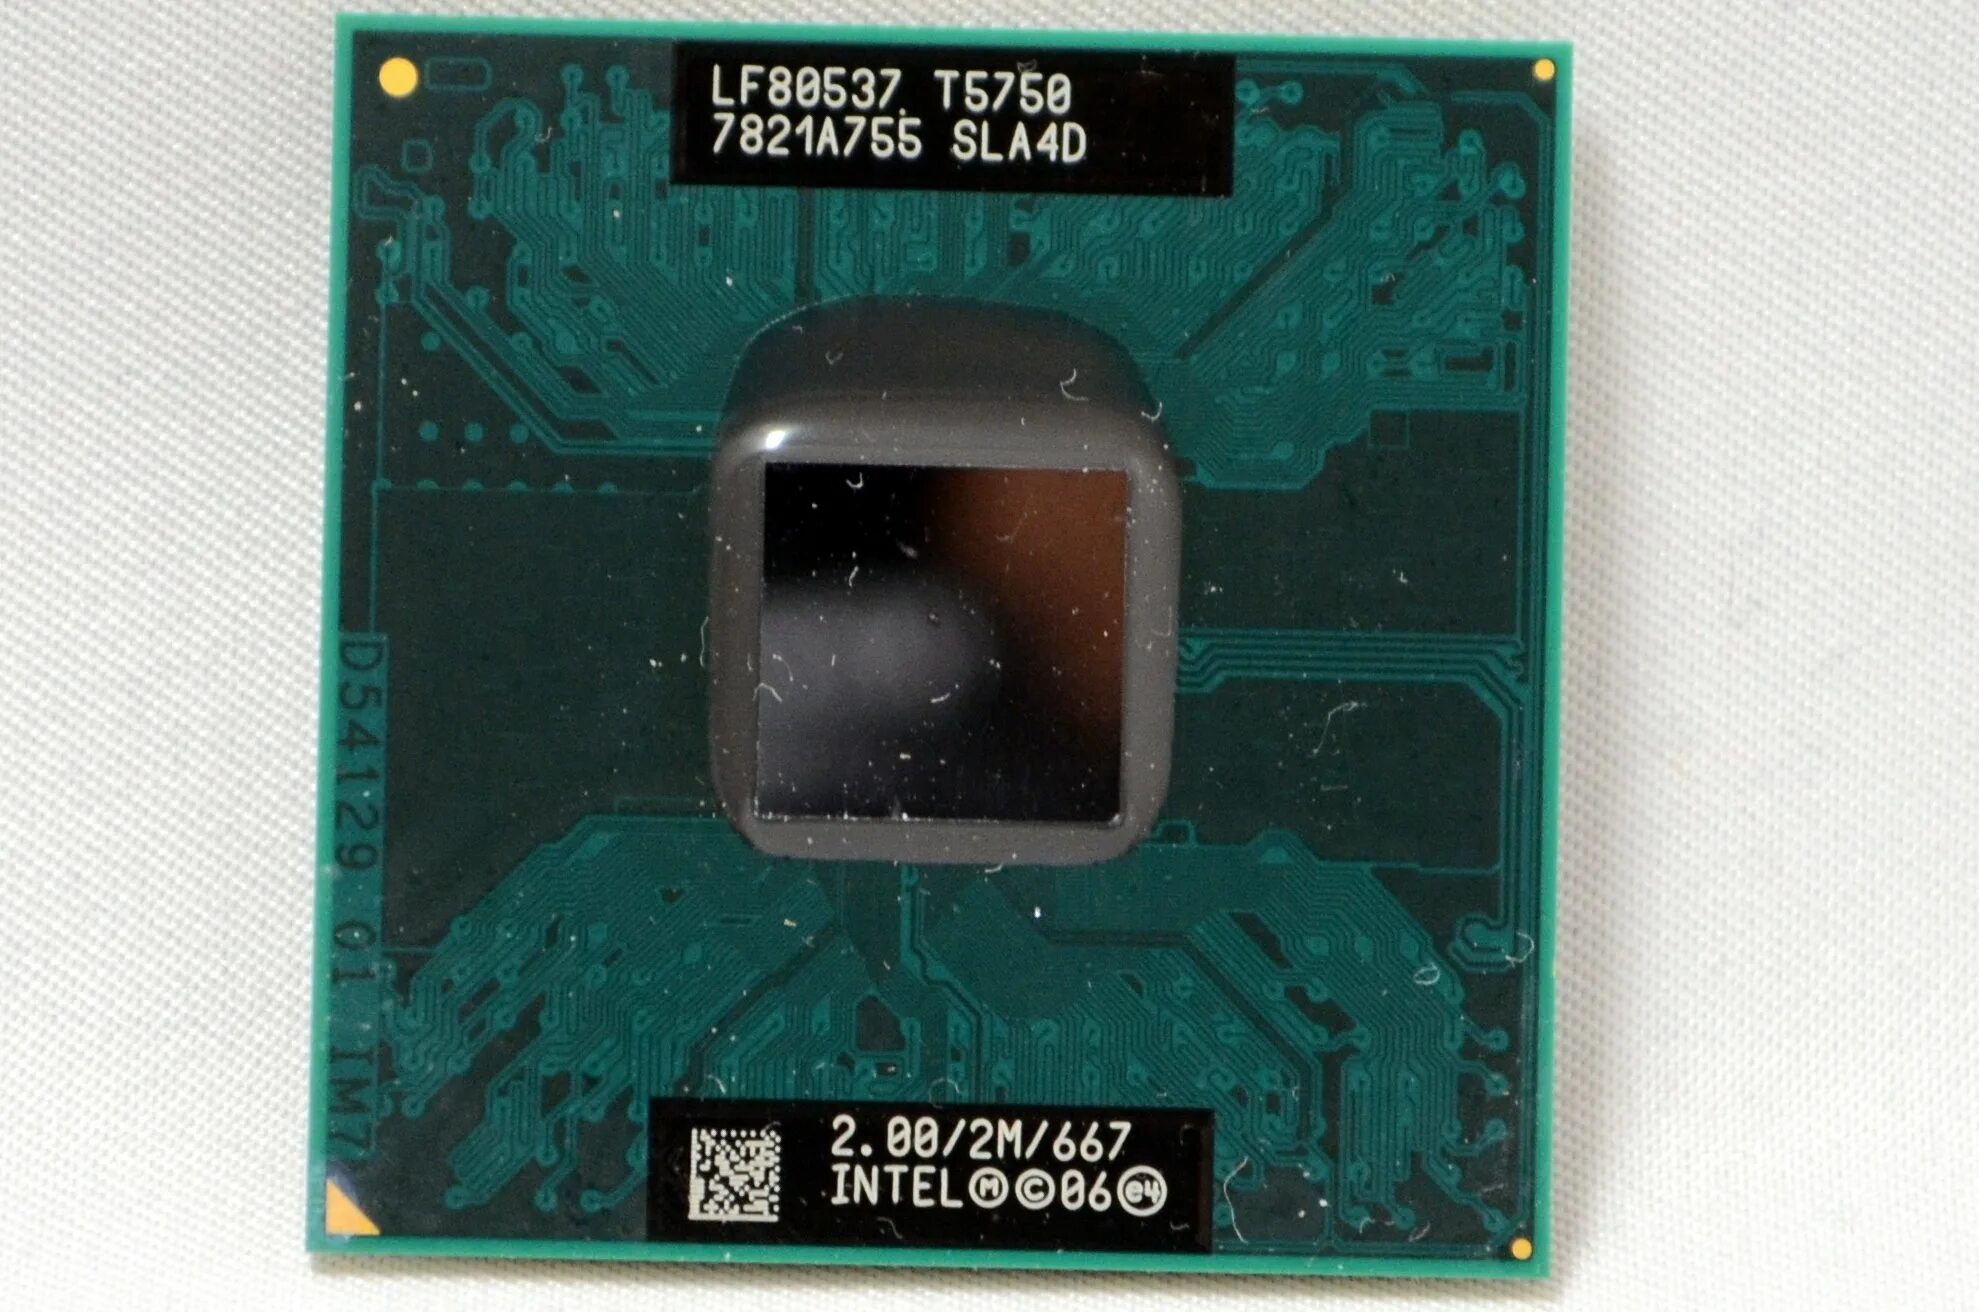 Intel core 2 duo оперативная память. Lf80537 t5750. Intel Core 2 Duo t5750. Core 2 Duo t7100. Core 2 Duo t5470.